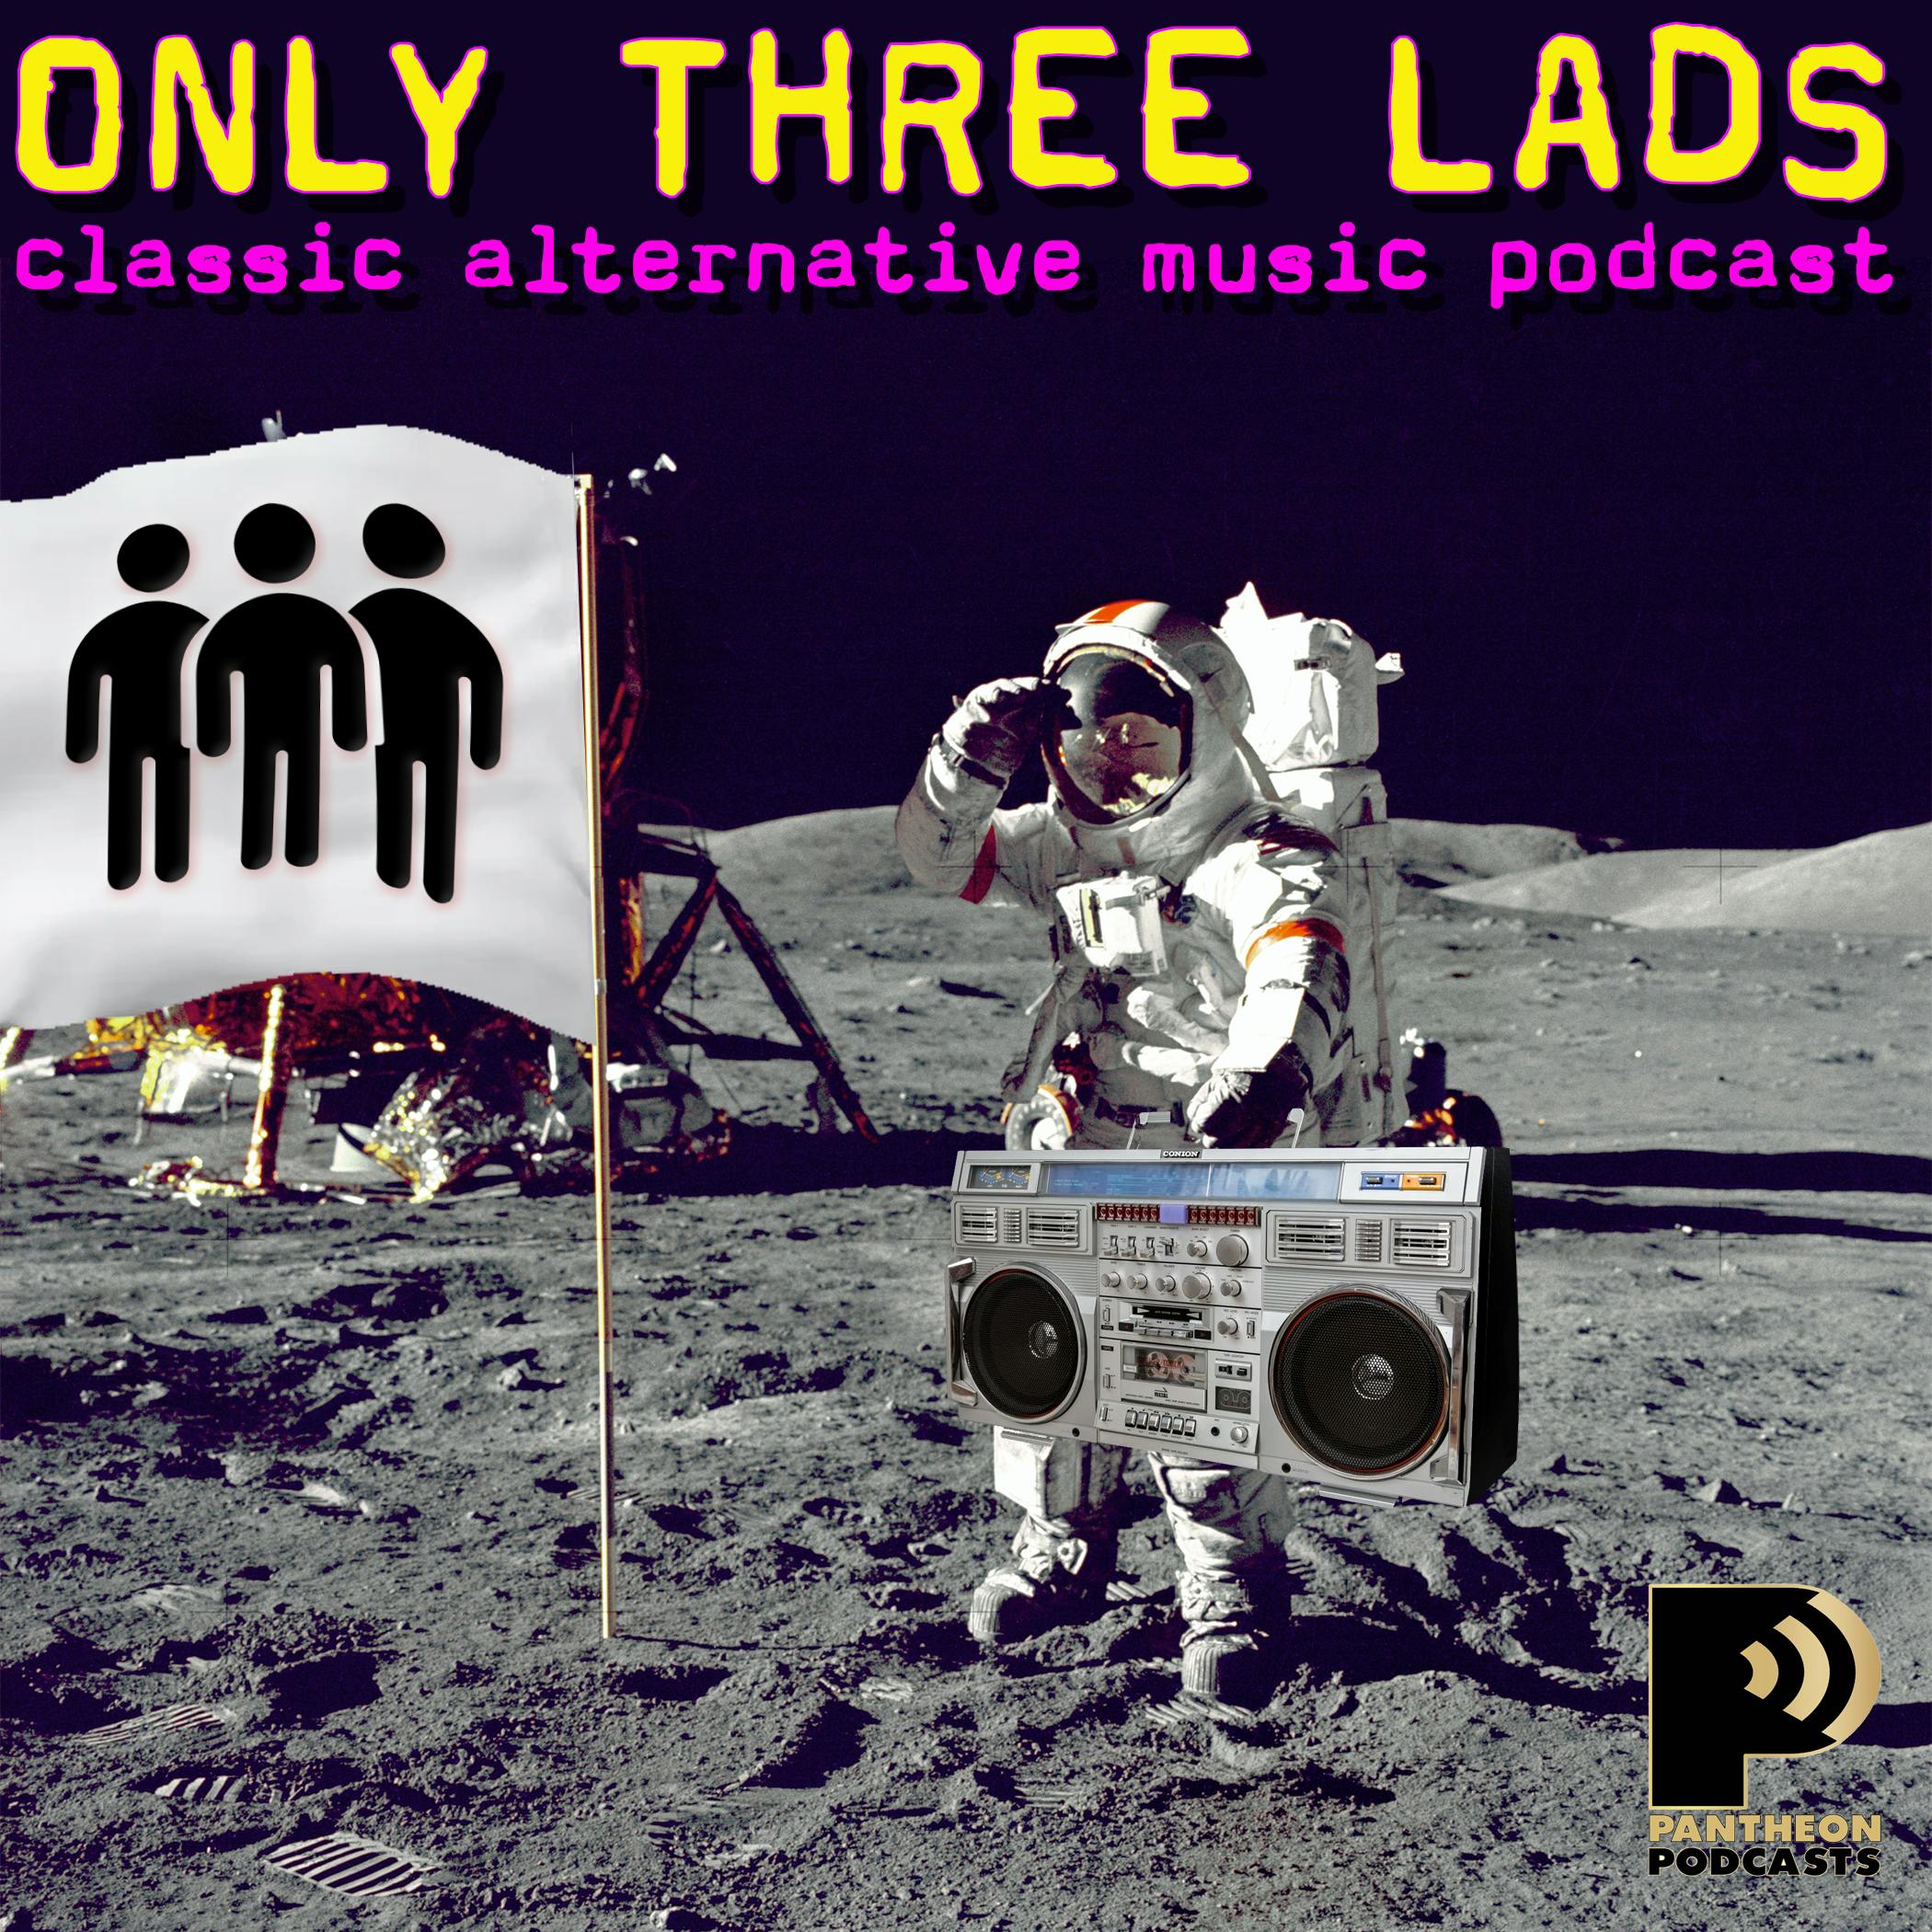 Only Three Lads - Classic Alternative Music Podcast: The Games, Part 2